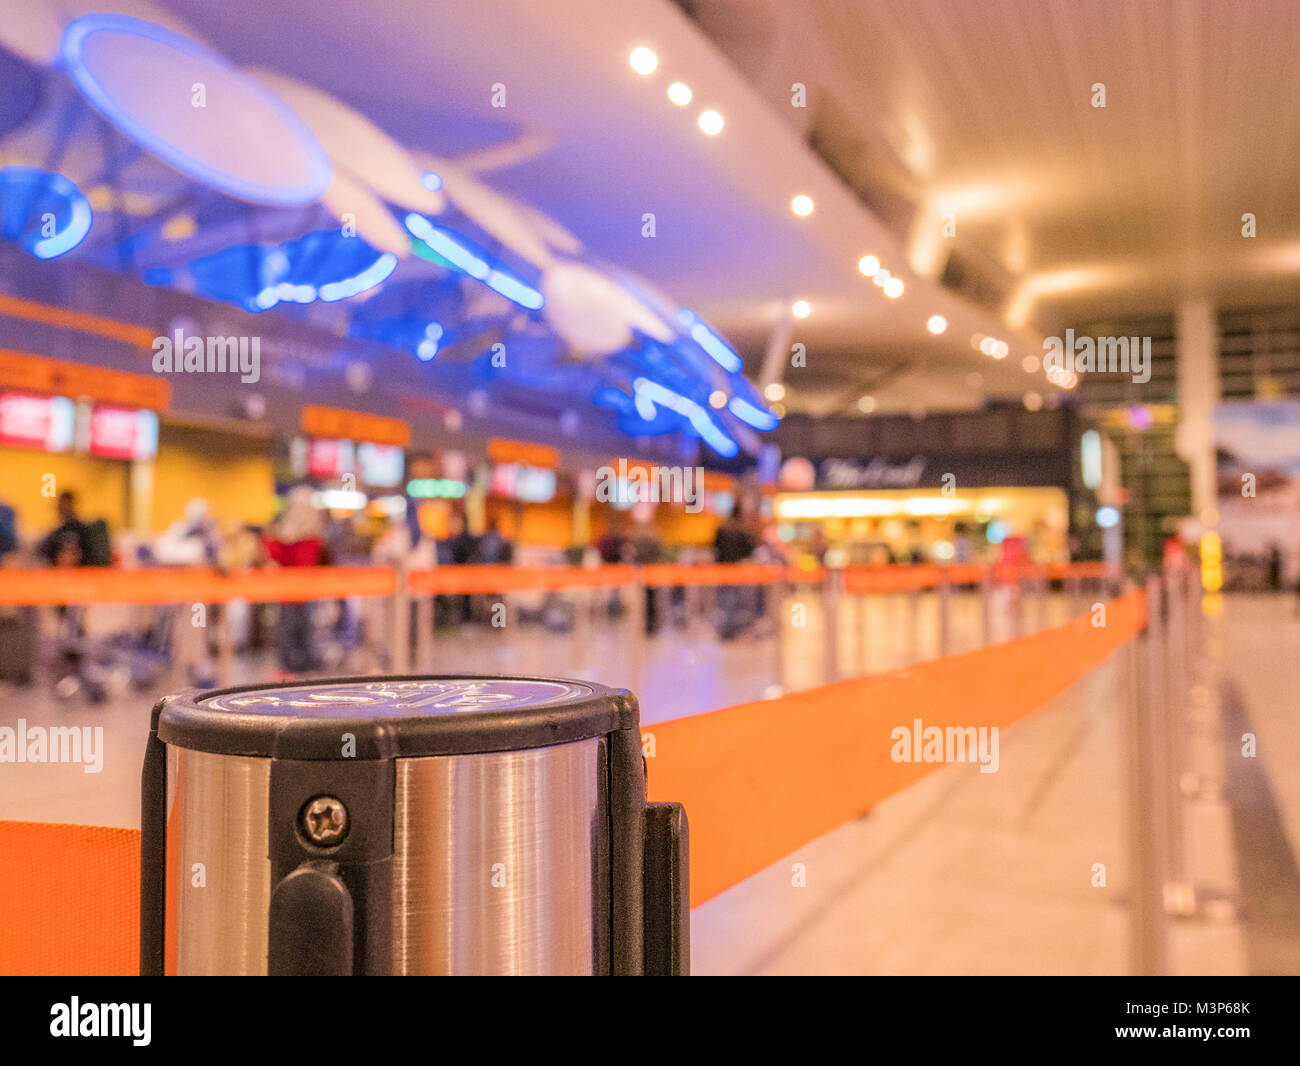 Queue Line in Airport with Blur Background, Crowd Control Retractable Belt Stock Photo